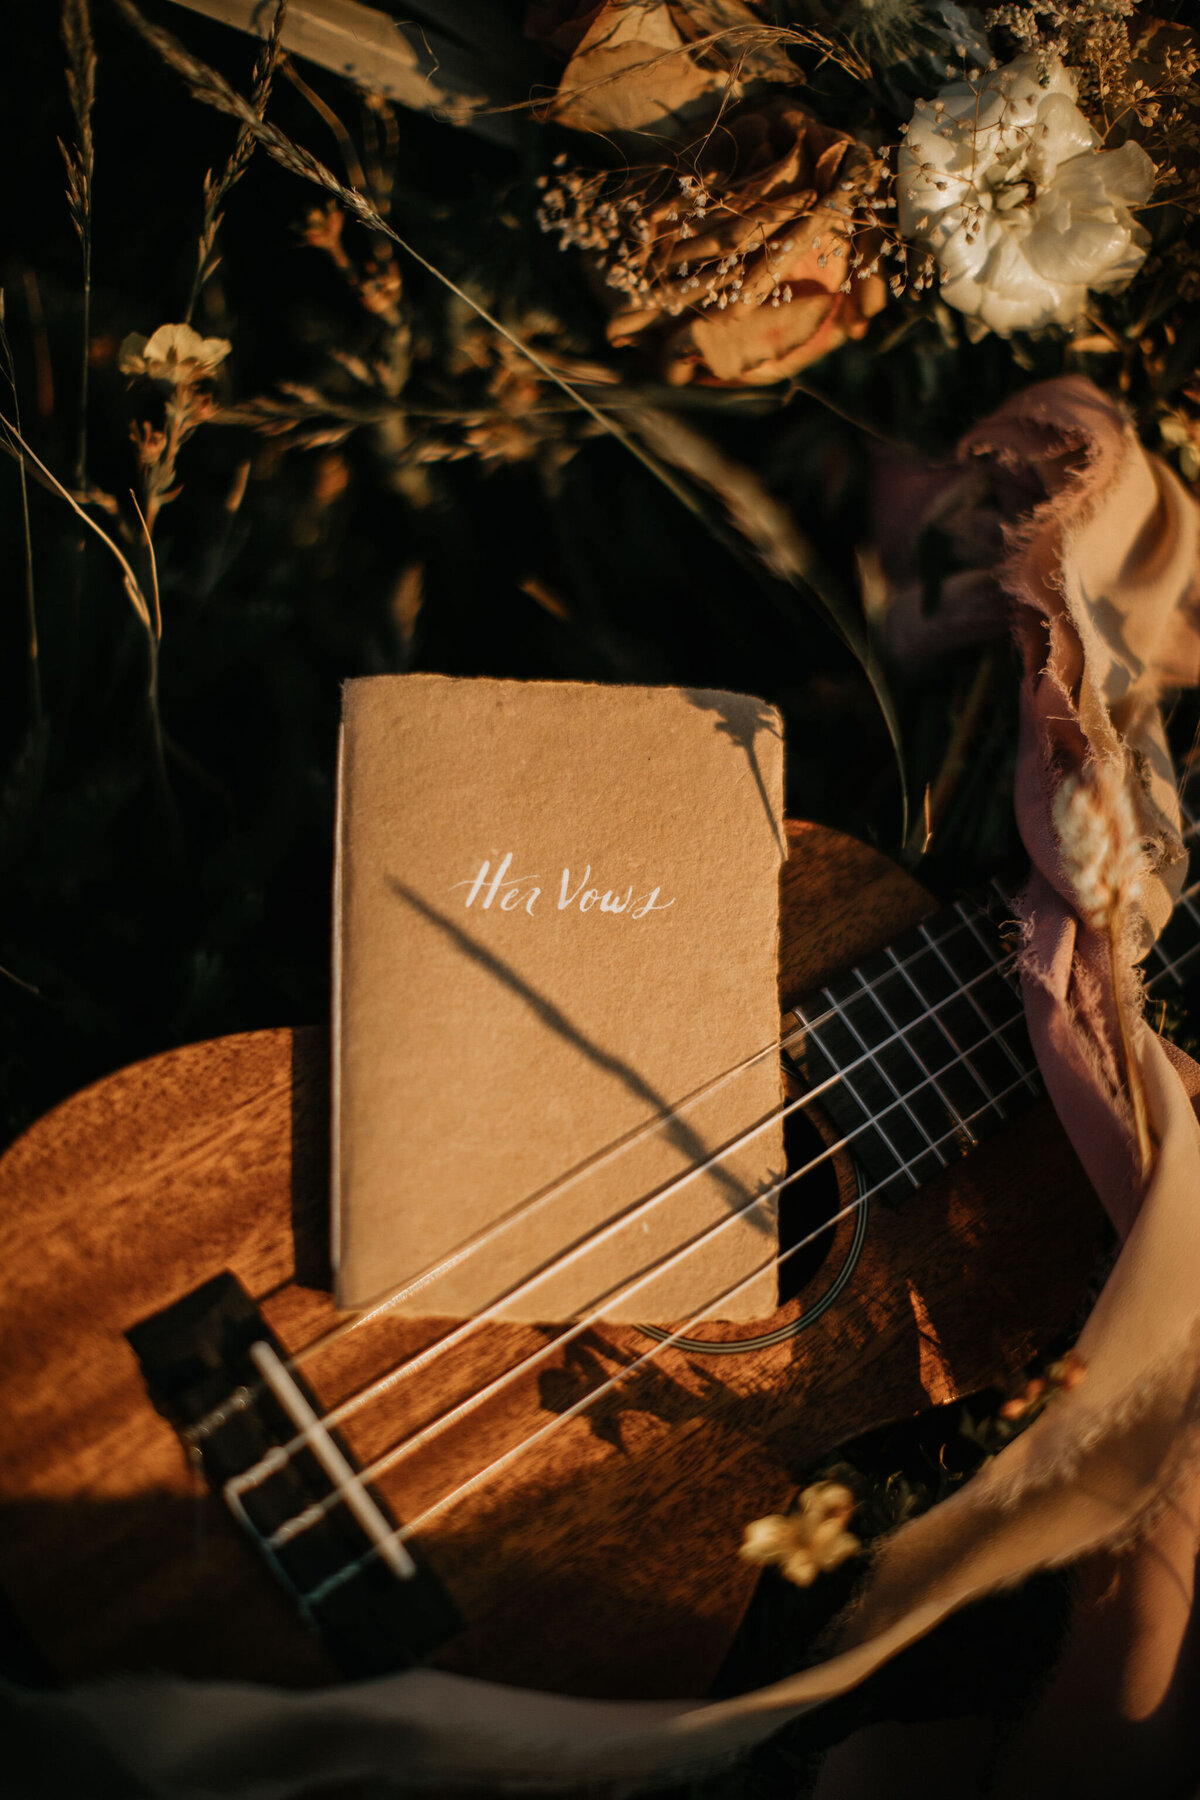 Tan wedding stationery with a white cursive font that reads ‘her vows’ set atop a ukulele with flowers